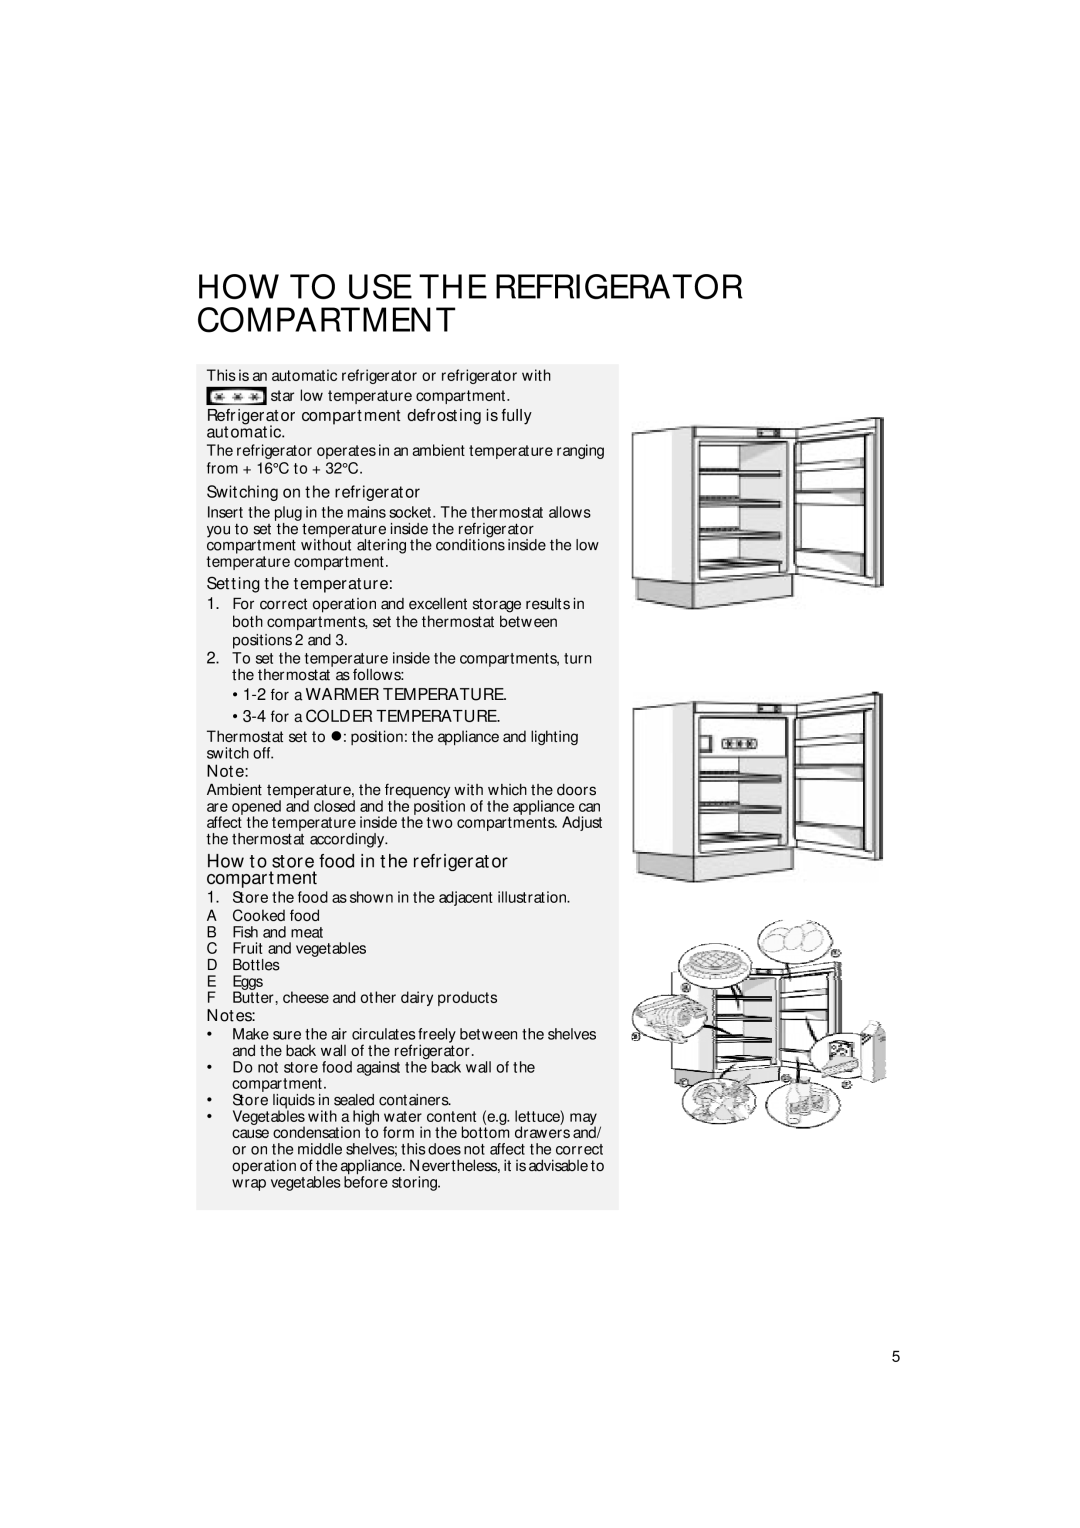 CDA FW350 manual How to store food in the refrigerator compartment, Refrigerator compartment defrosting is fully automatic 